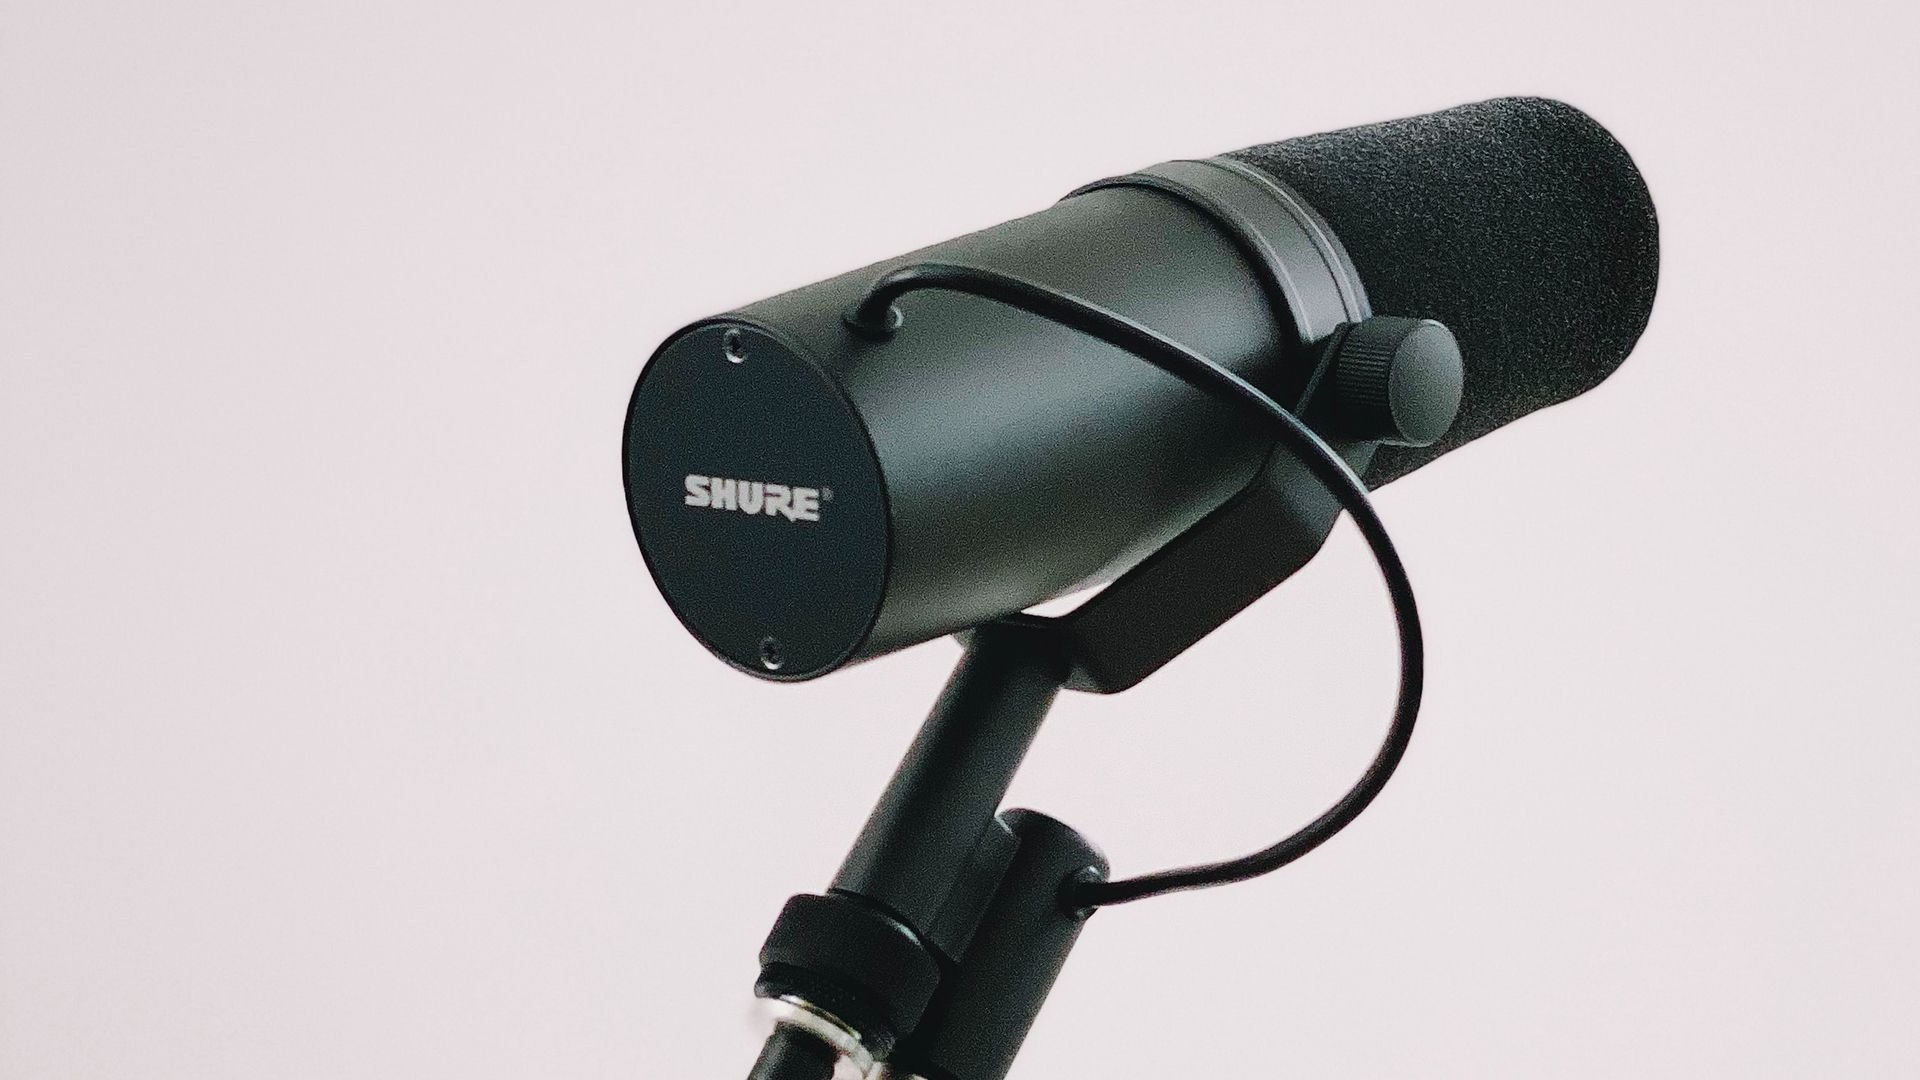 How to Choose the Best Microphone for YouTube